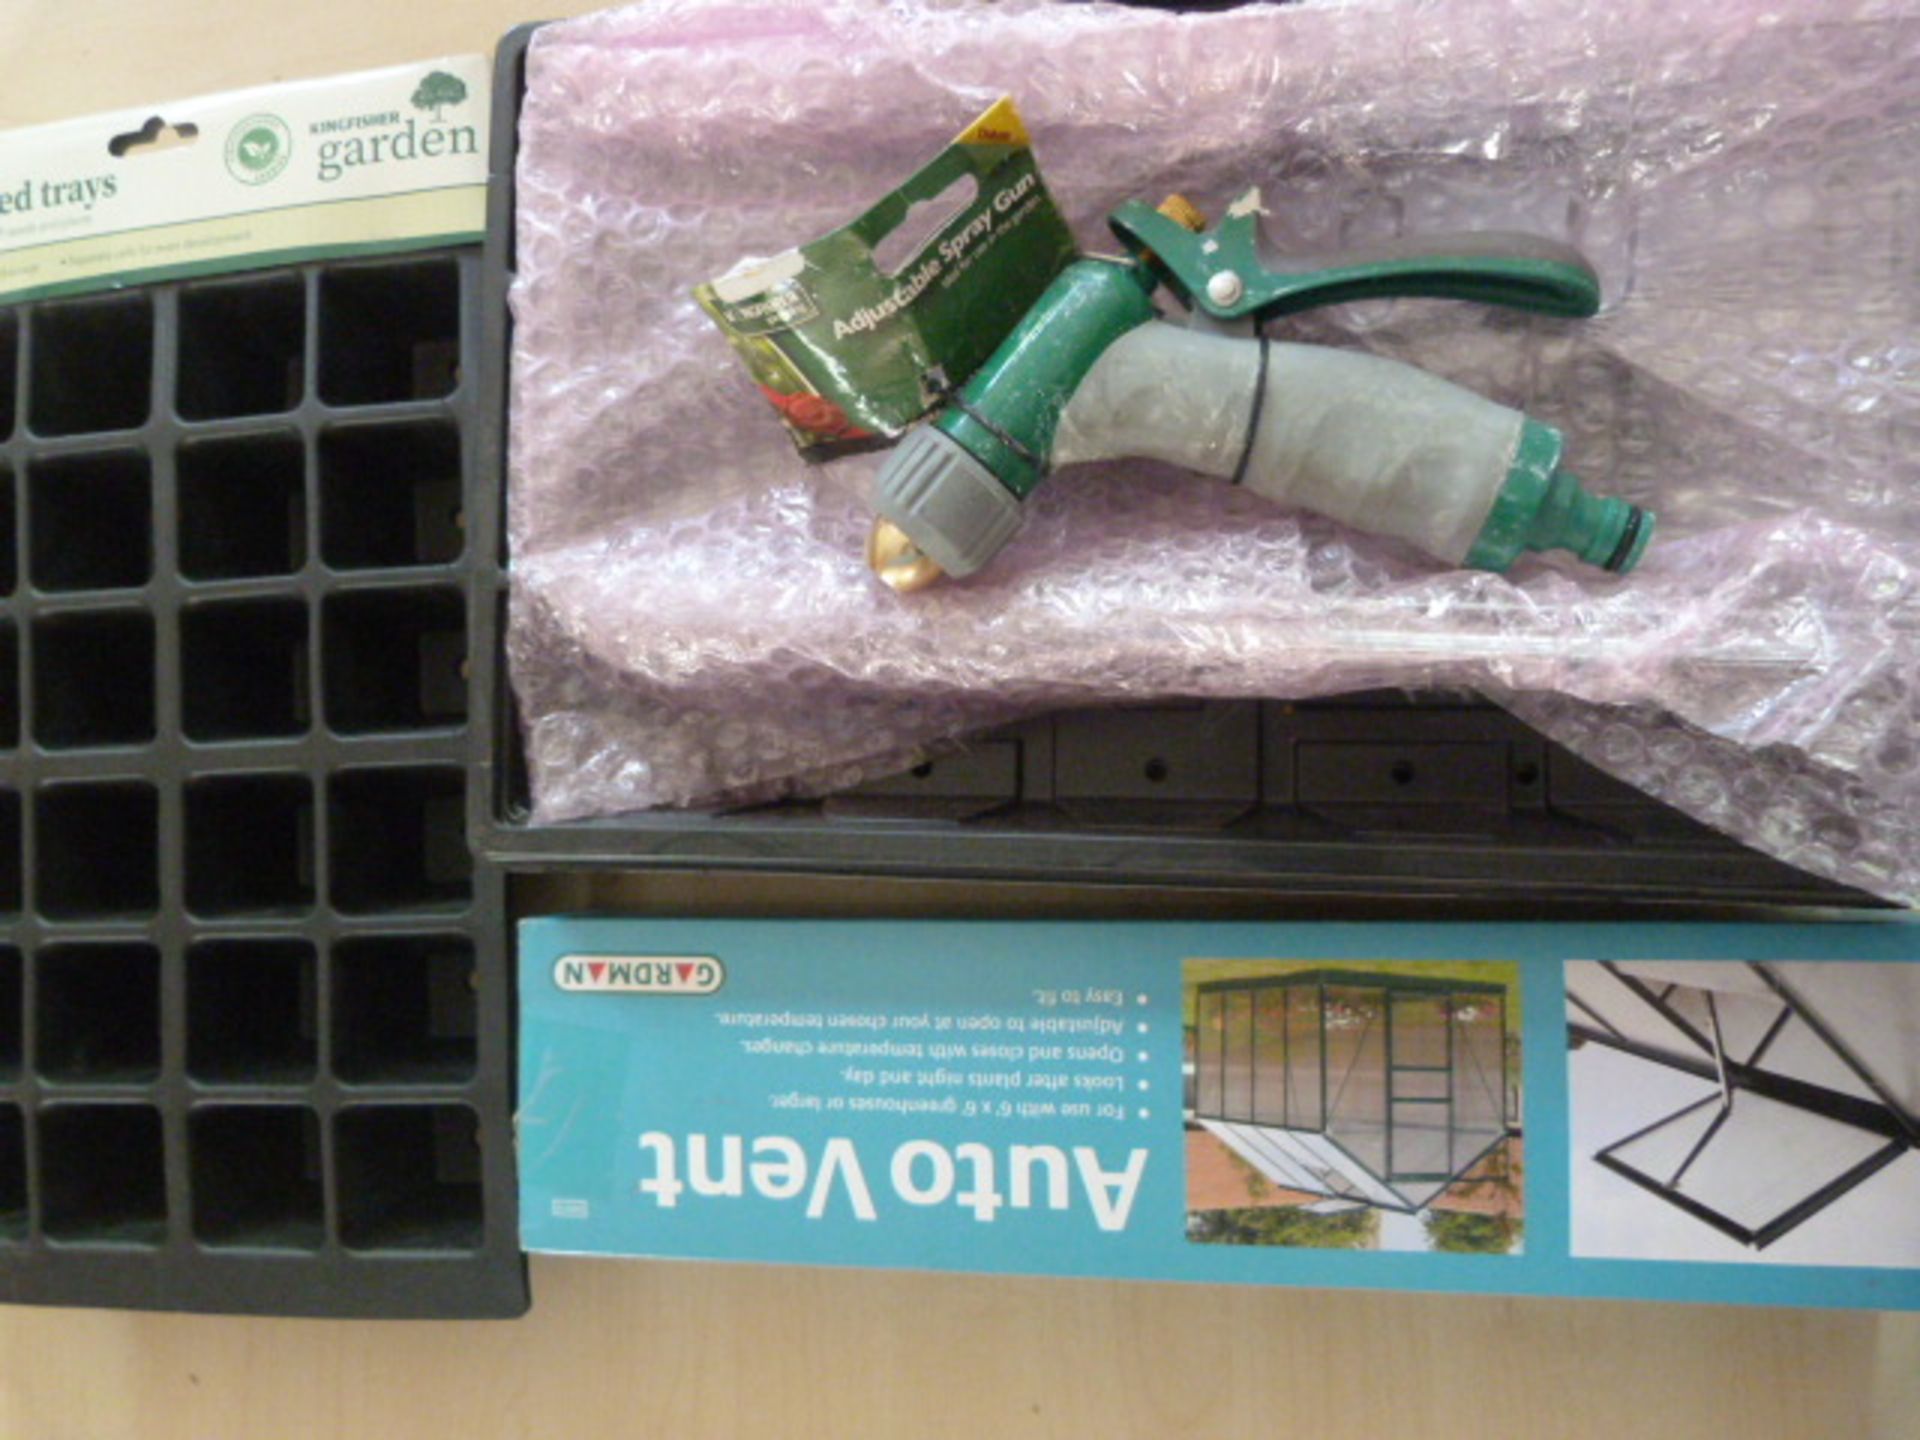 *Seed Trays, Greenhouse Auto Vent and a Adjustable